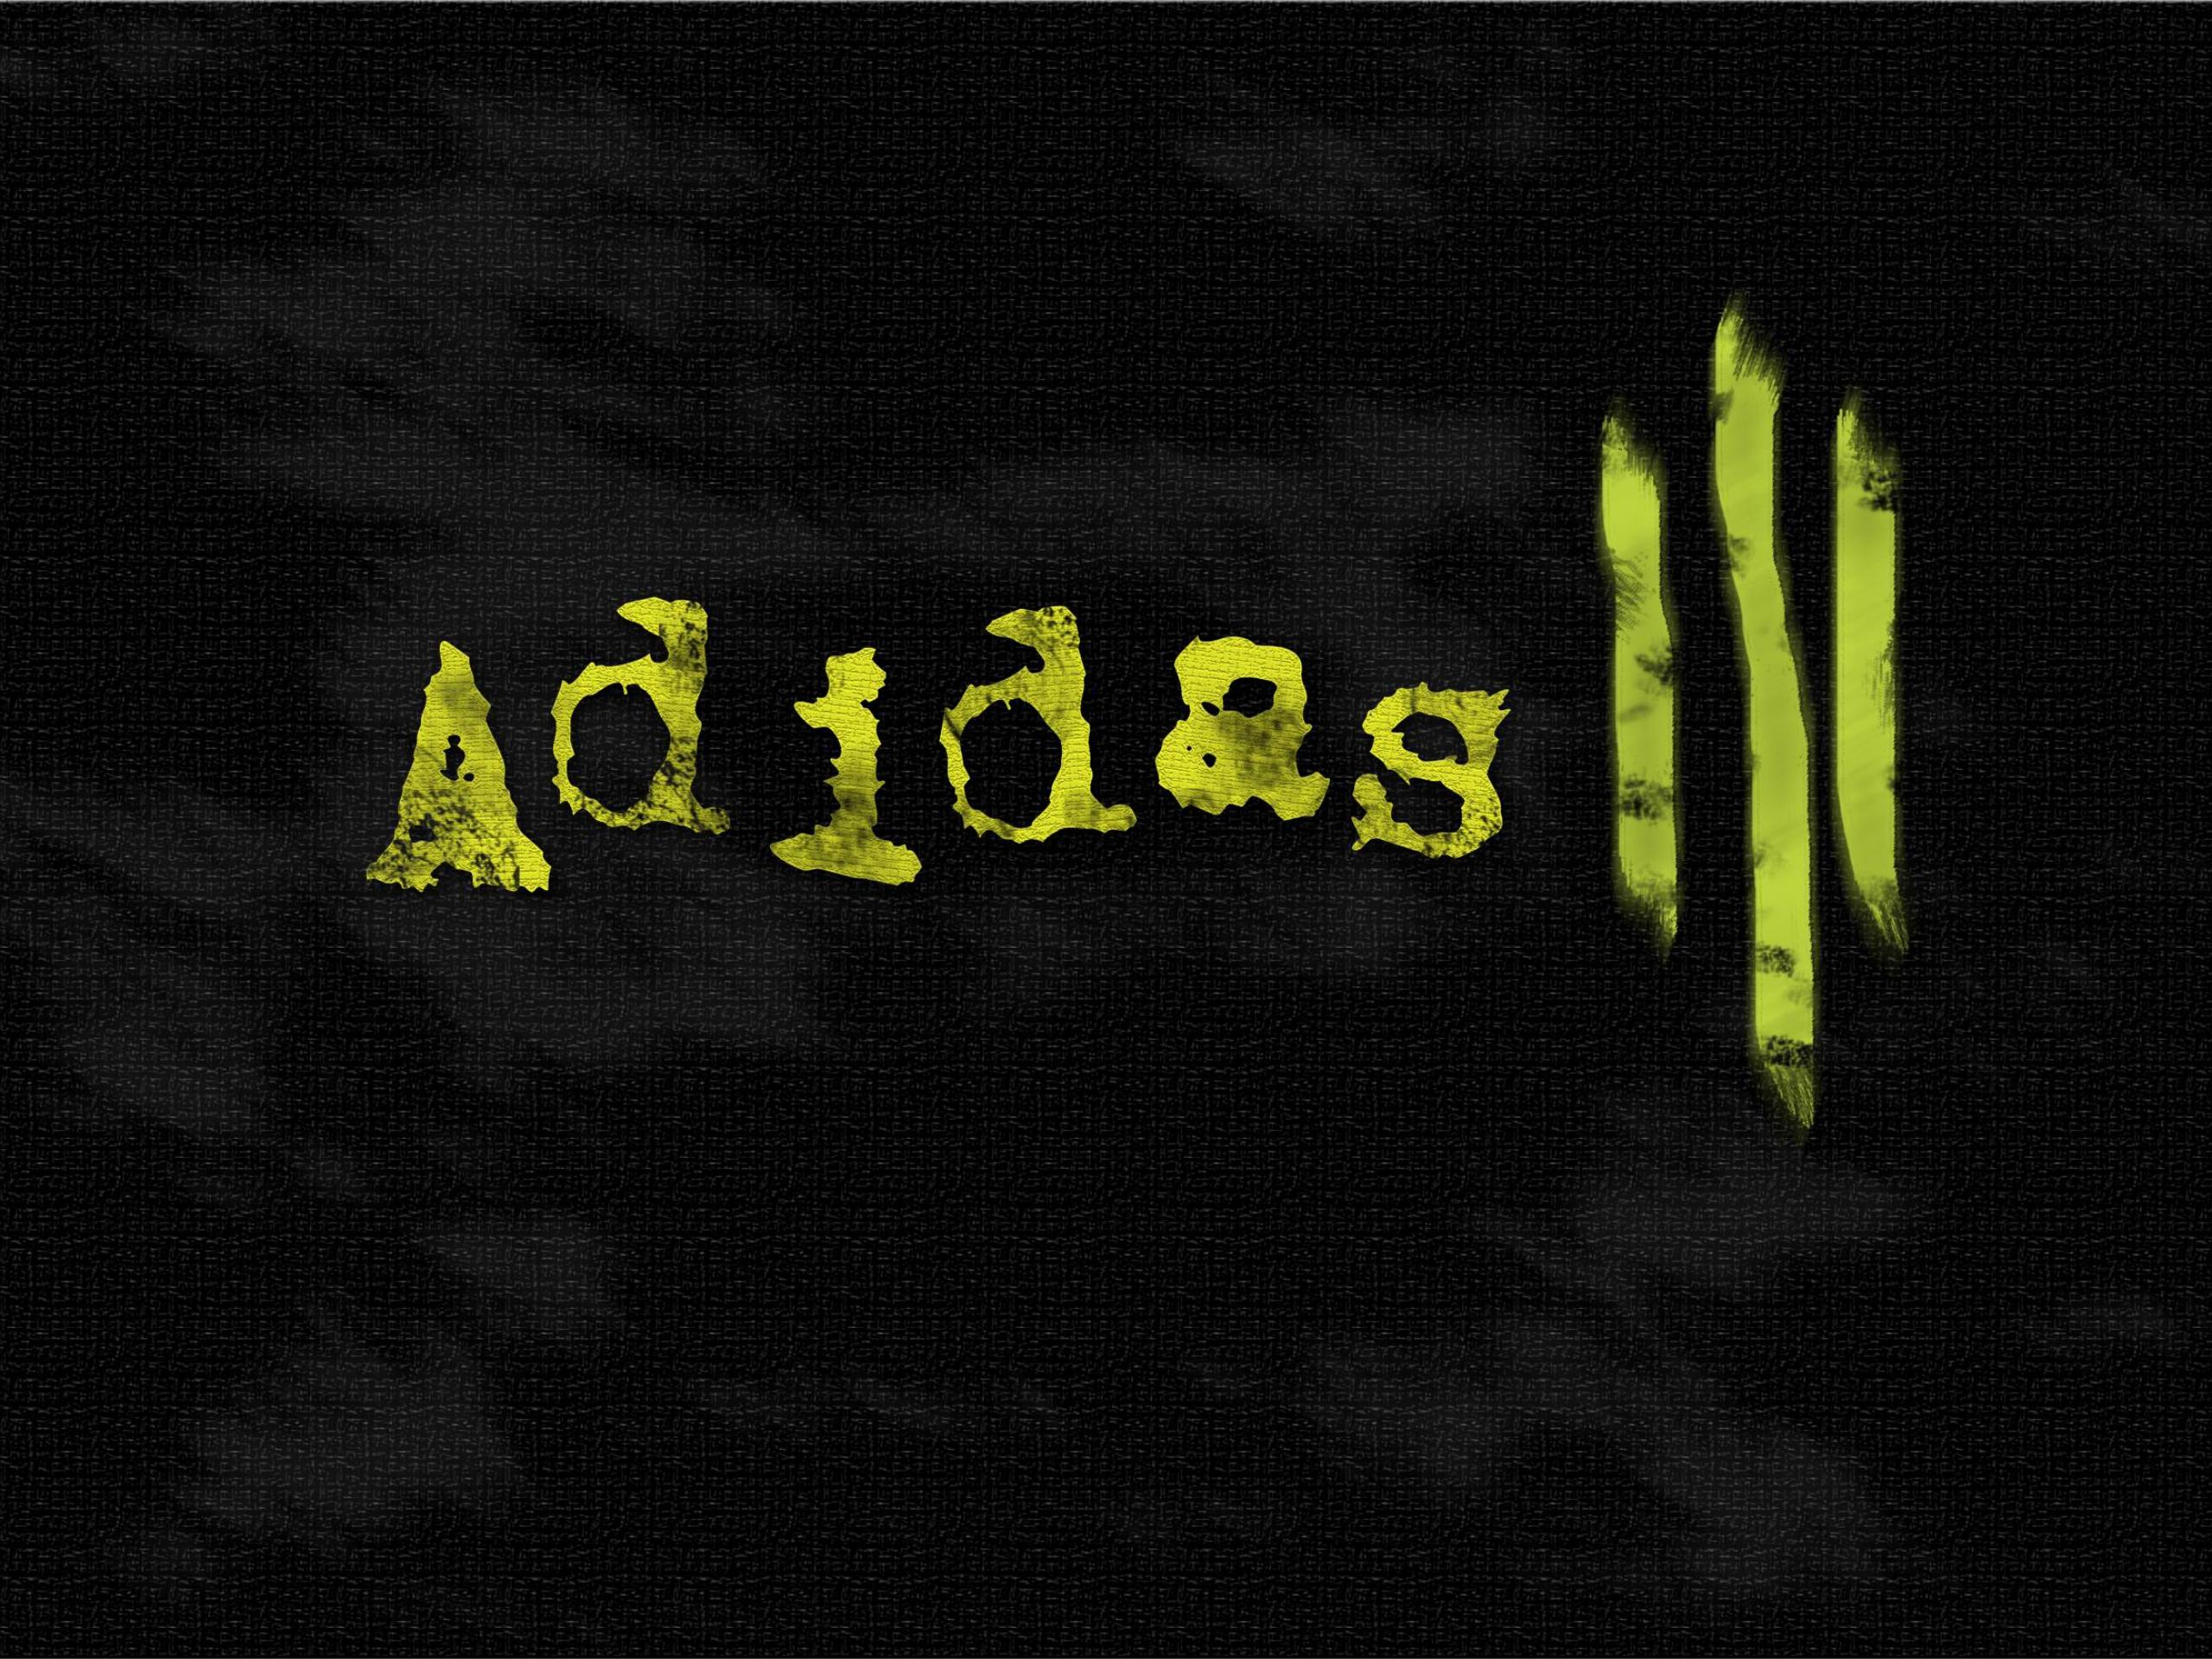 Adidas Font And Logo Black Background High Definition Wallpaper